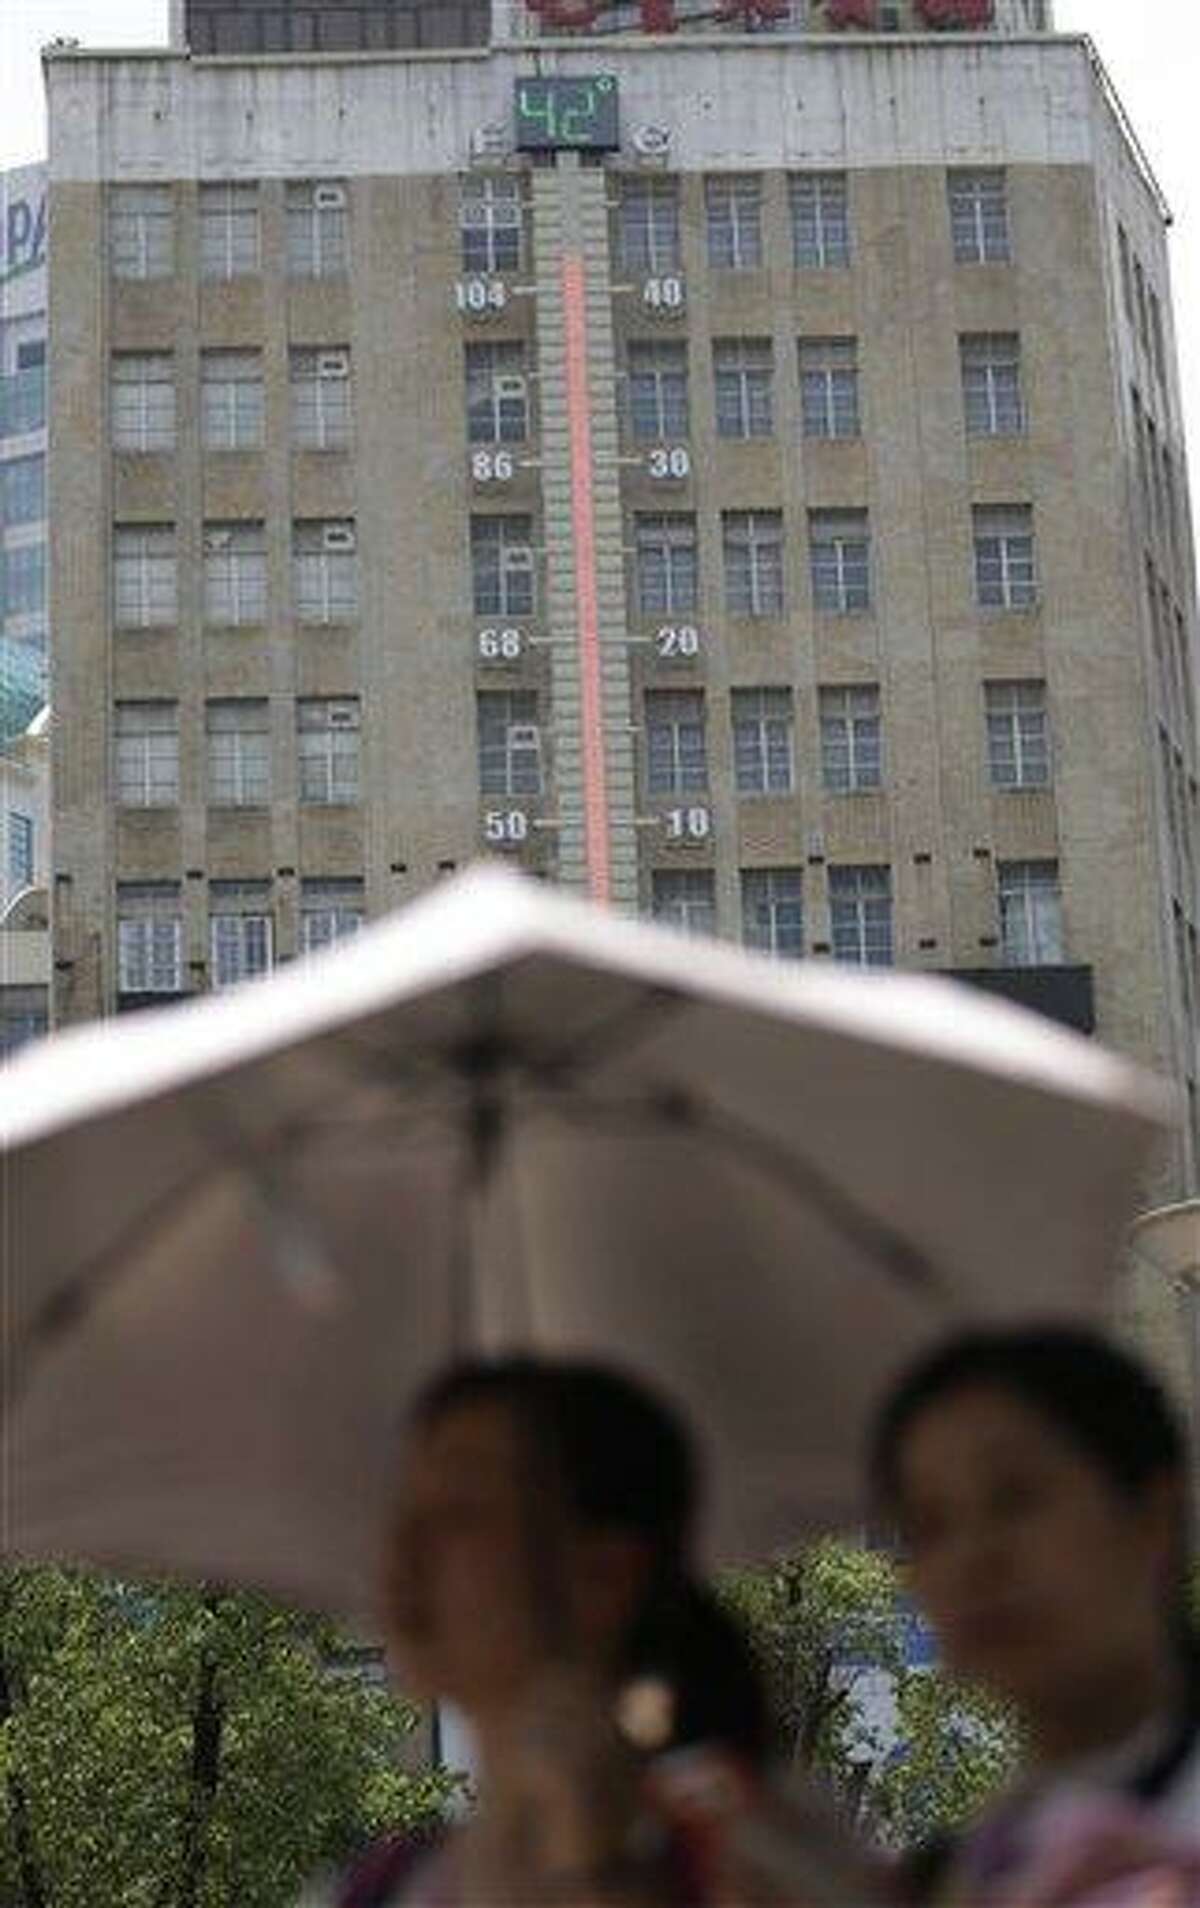 Women walk near a giant thermometer on the building which indicates the current highest temperature in Shanghai, China, Thursday, Aug. 1, 2013. Hot weather has set in with temperatures rising up to 40 degrees Celsius (104 degrees Fahrenheit) in Shanghai. (AP Photo/Eugene Hoshiko)